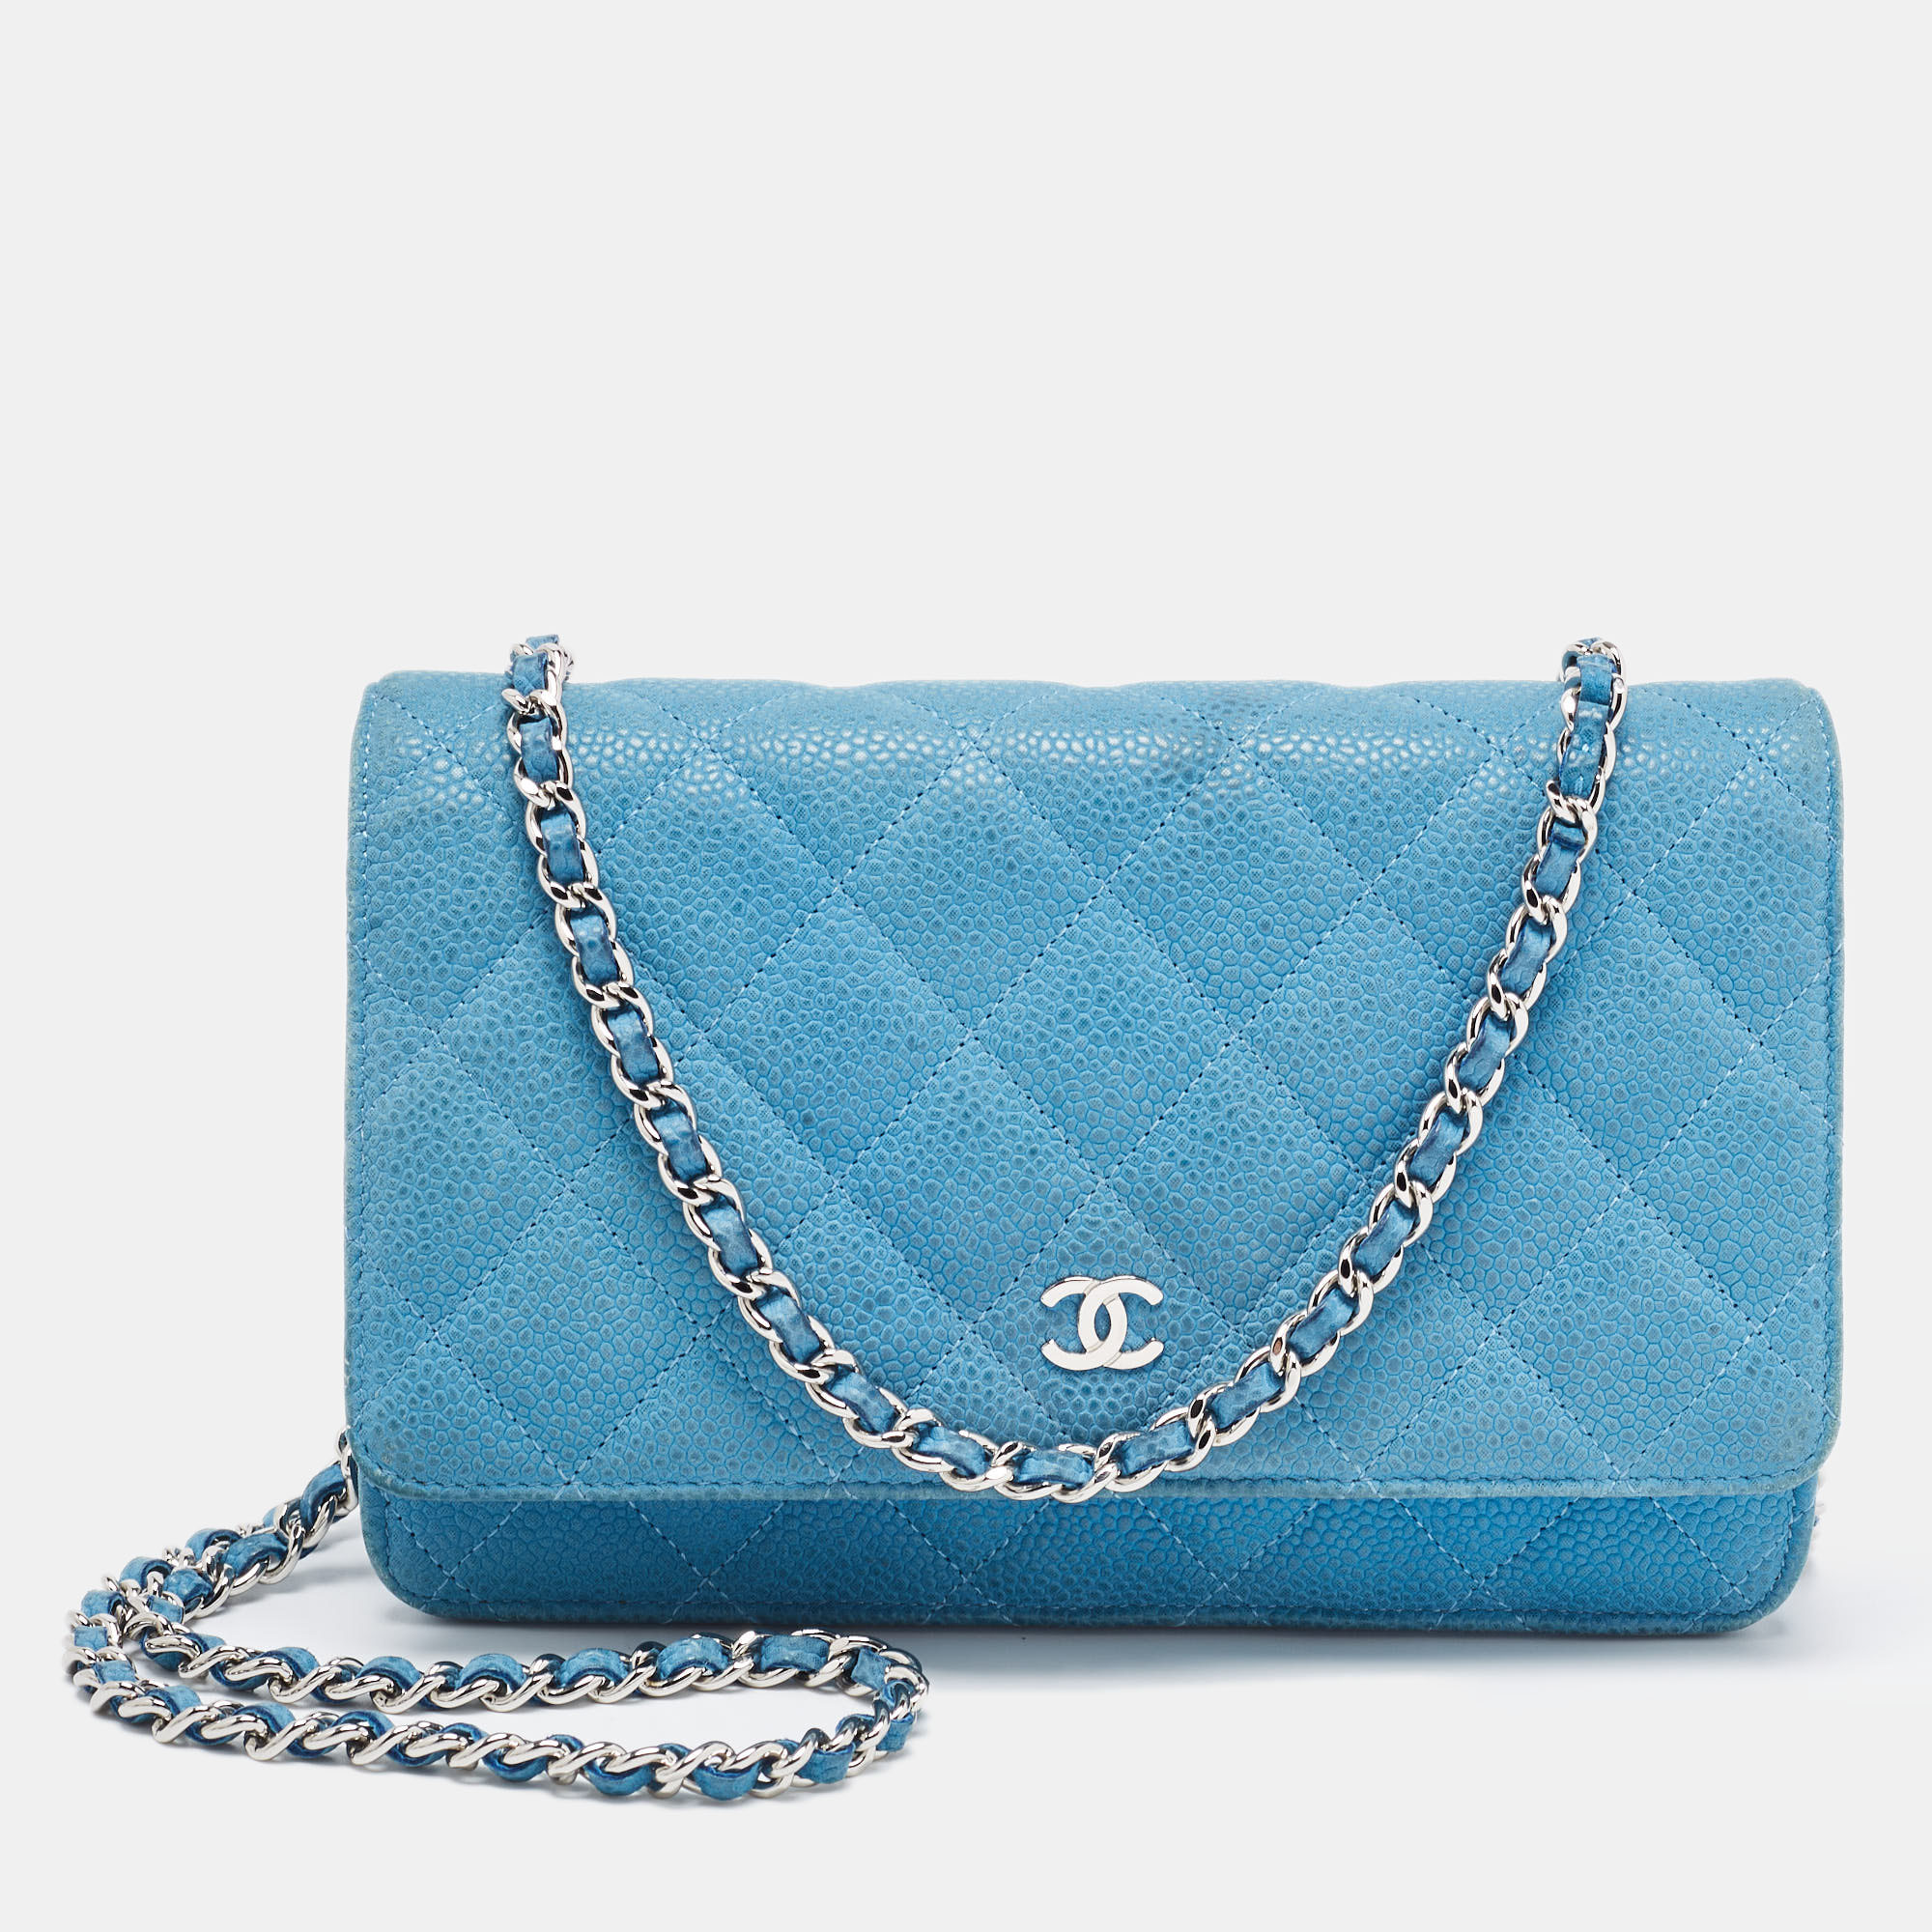 Chanel Blue Quilted Caviar Leather Flap Coin Purse with Chain